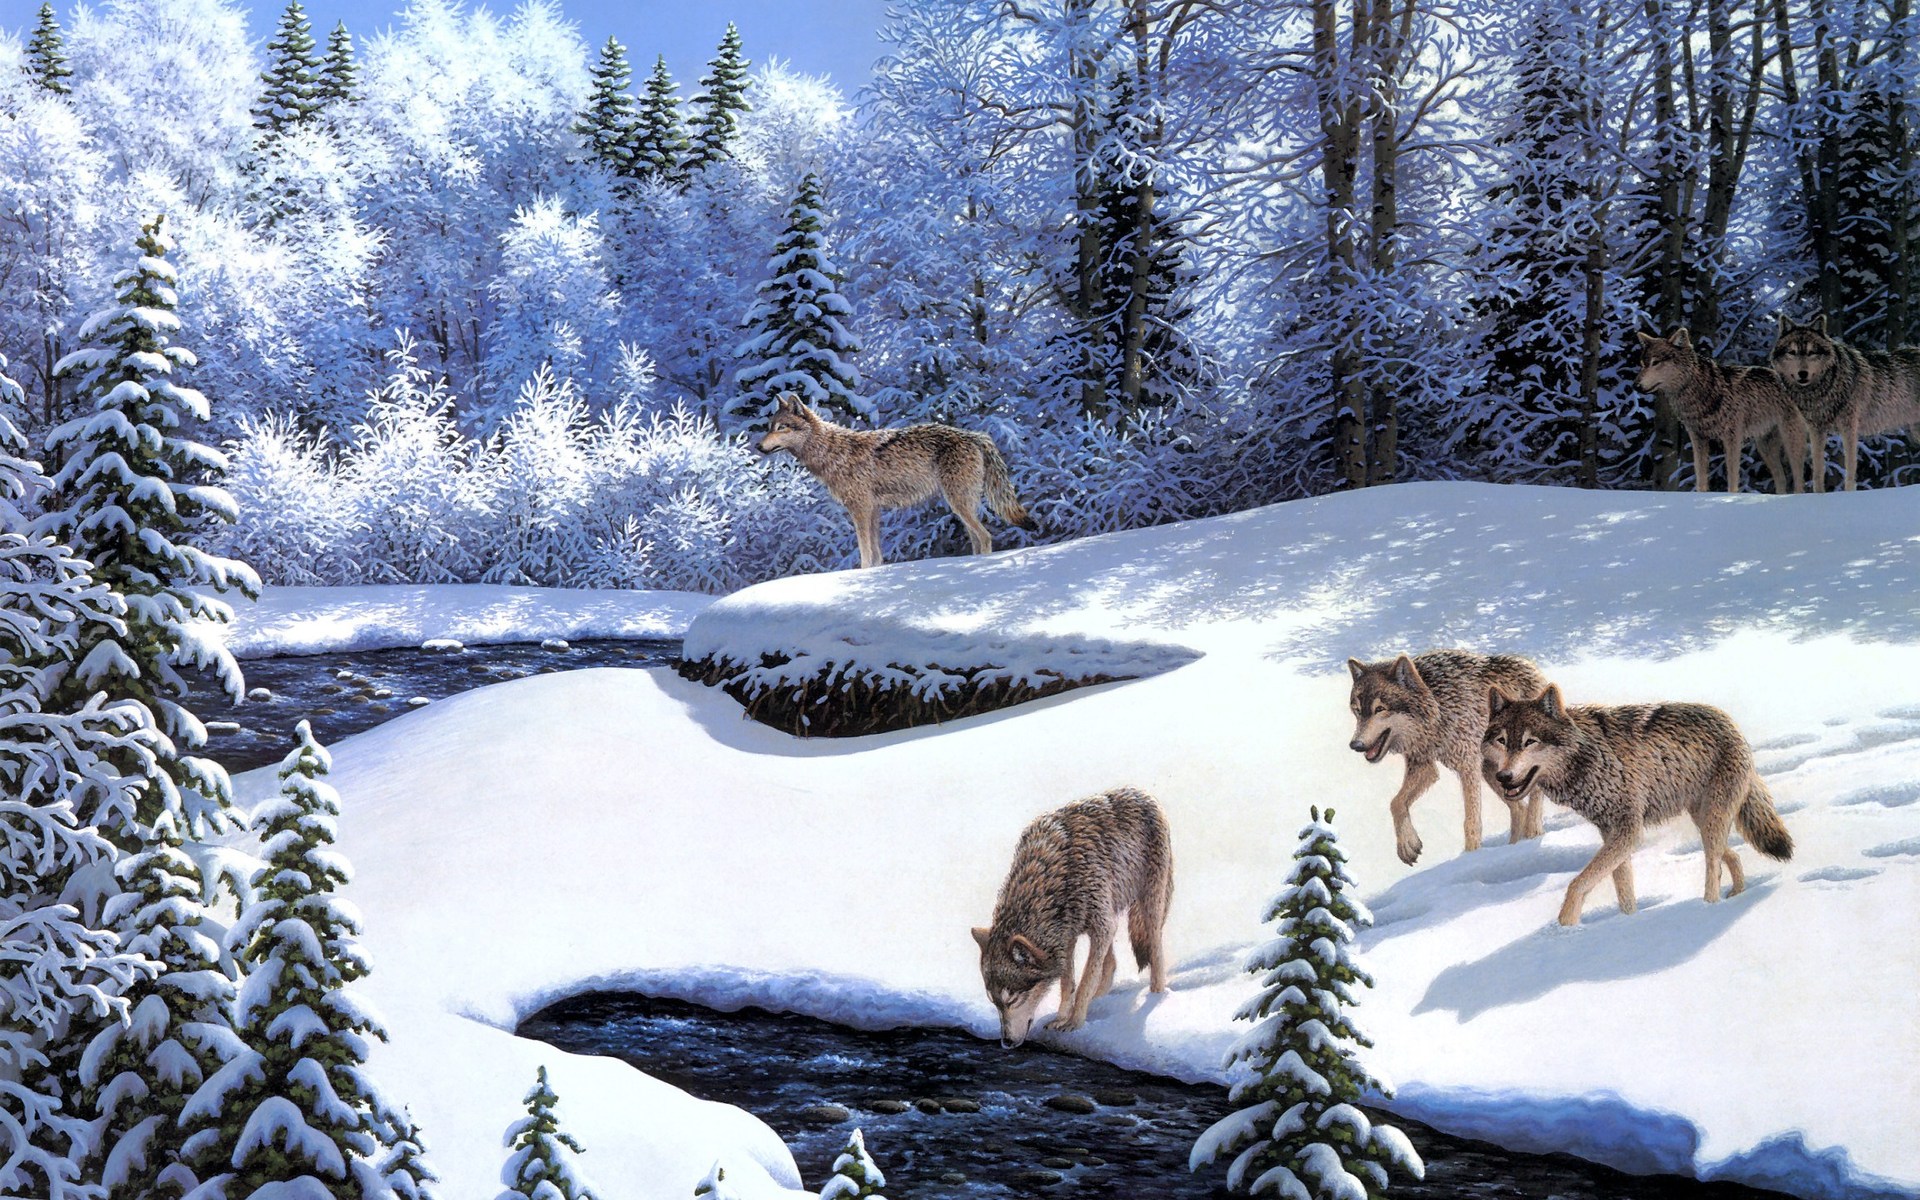 robert, A, Richert, On, The, Prowl, Art, Paintings, Oil, Nature, Landscapes, Forest, Trees, Winter, Snow, Seasons, Rivers, Streams, Water, Scenic, Bright, White, Wildlife, Predators, Animals, Wolf, Wolves, Cold, Wallpaper